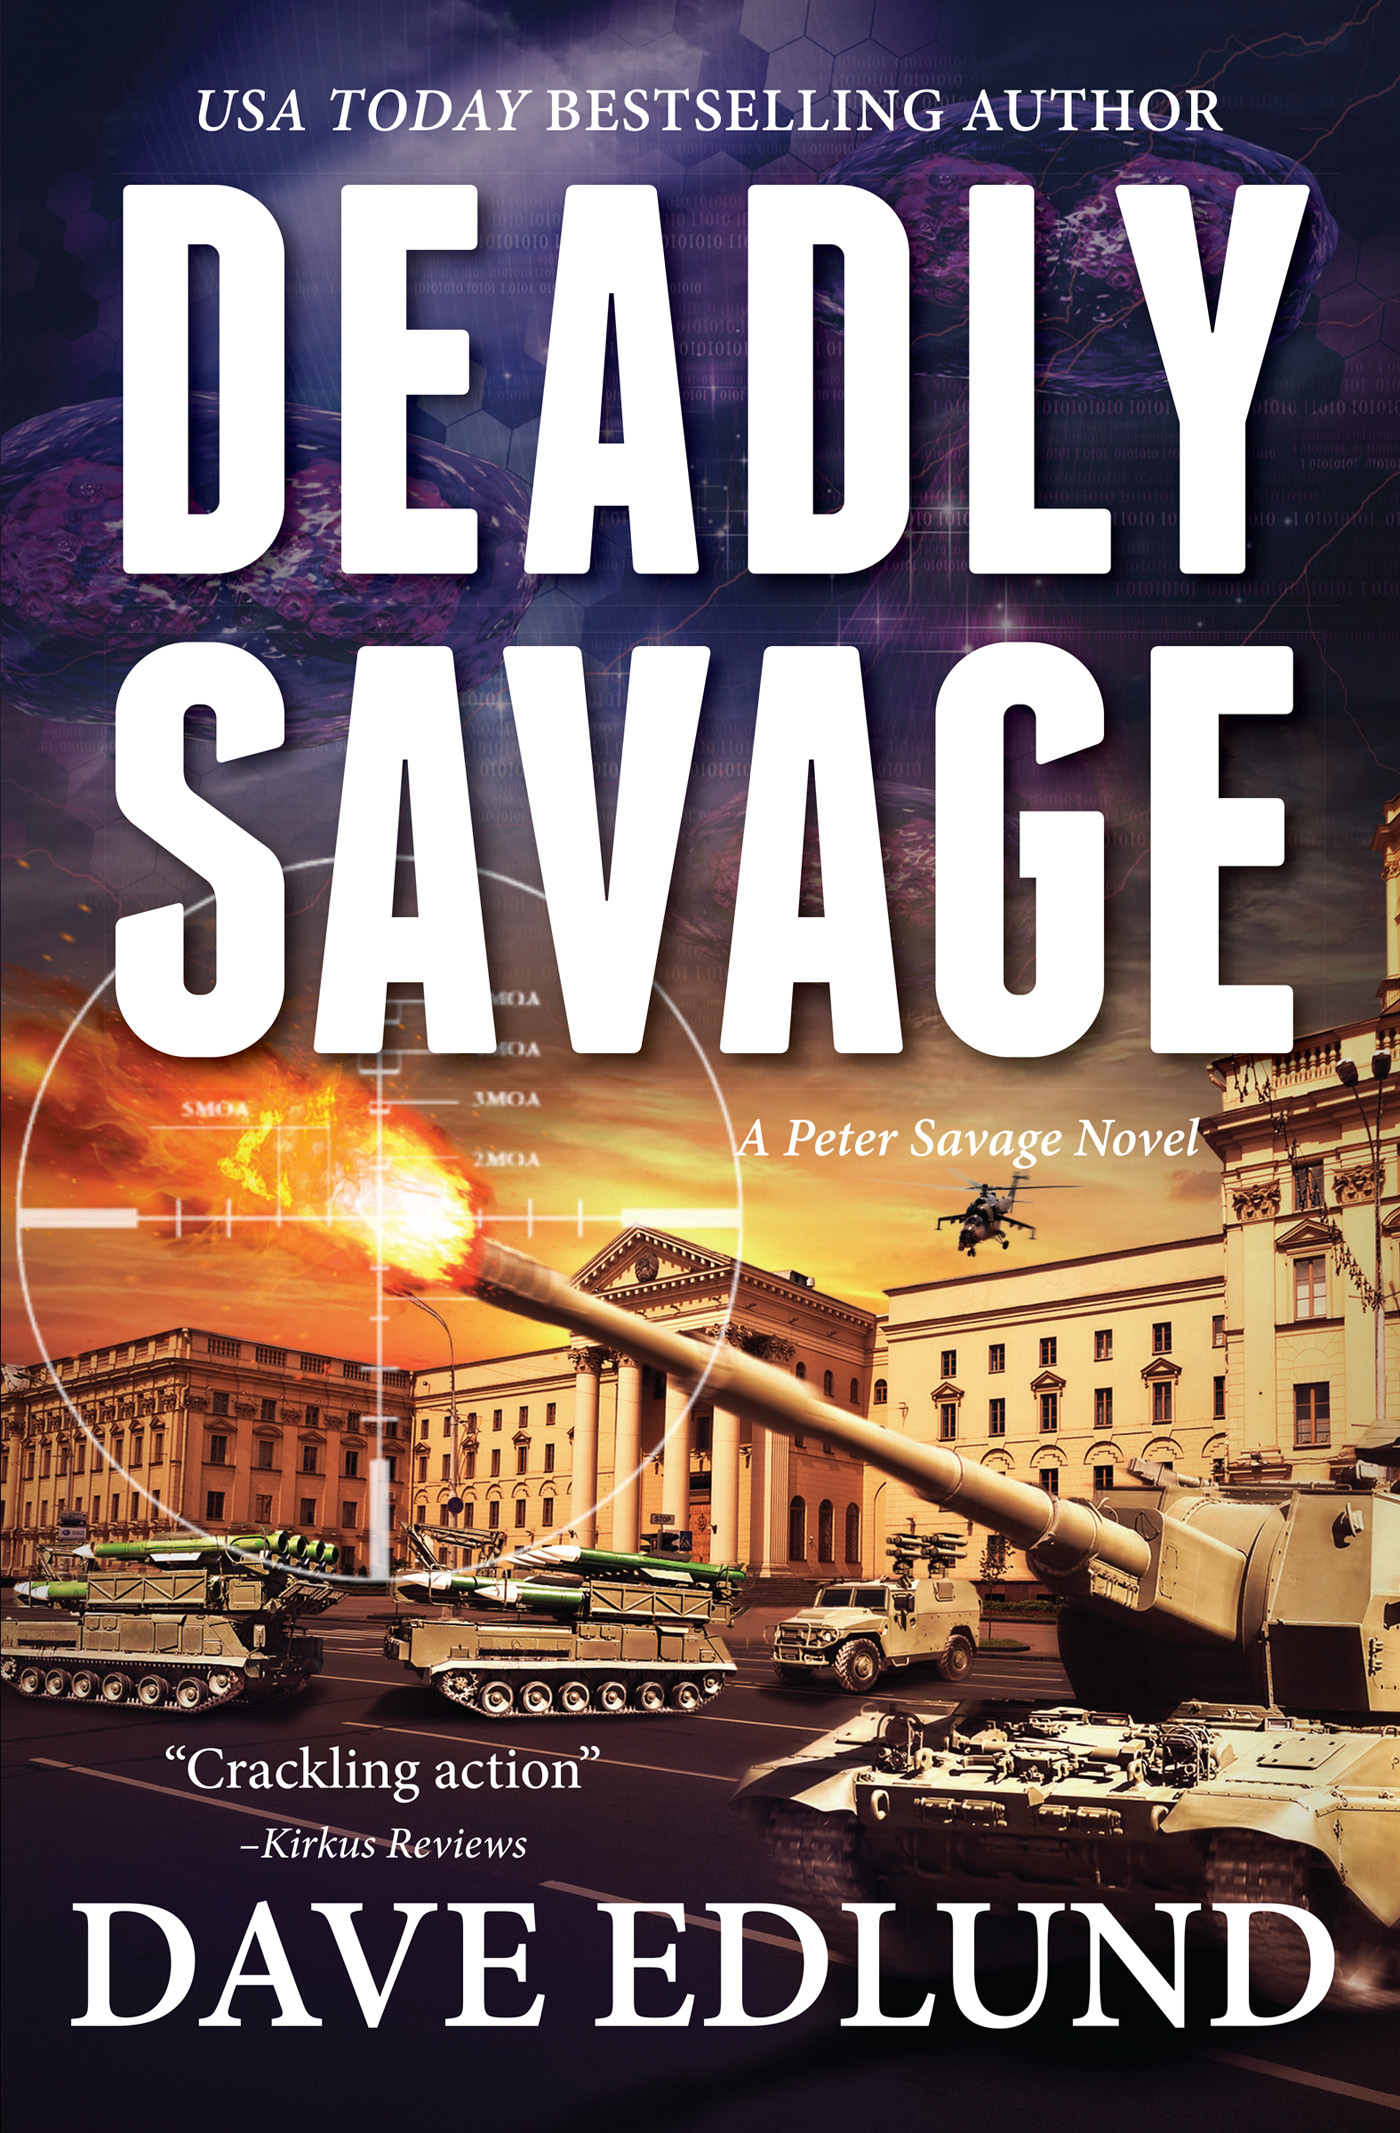 This image is the cover for the book Deadly Savage, Peter Savage